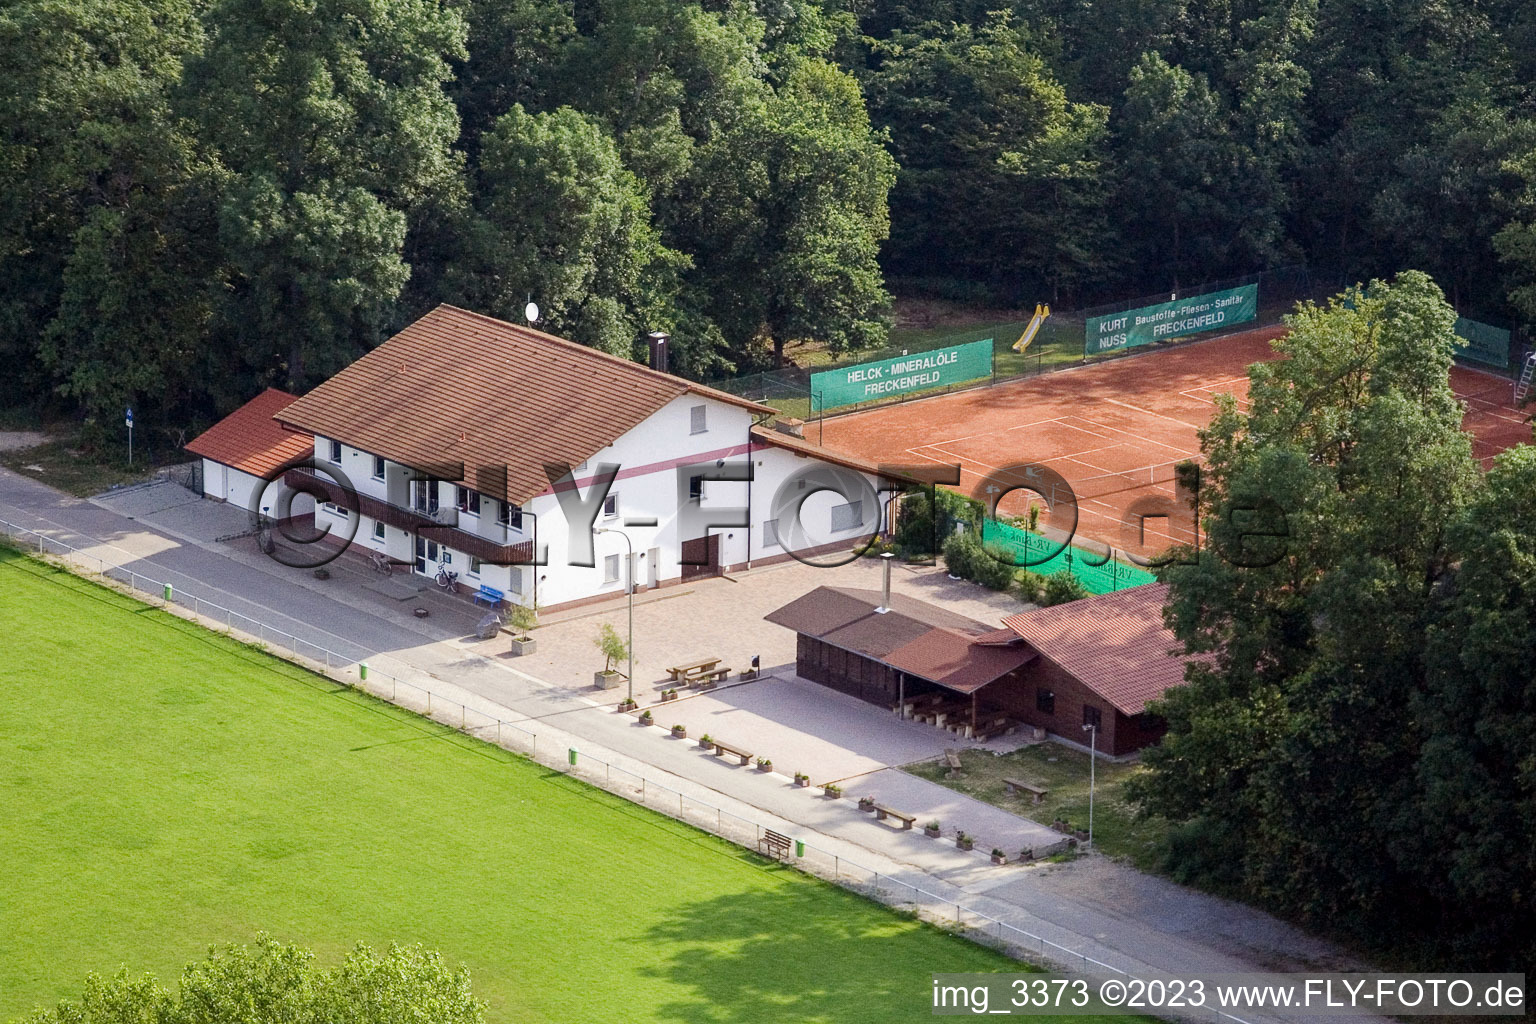 Aerial view of Sports ground in Freckenfeld in the state Rhineland-Palatinate, Germany